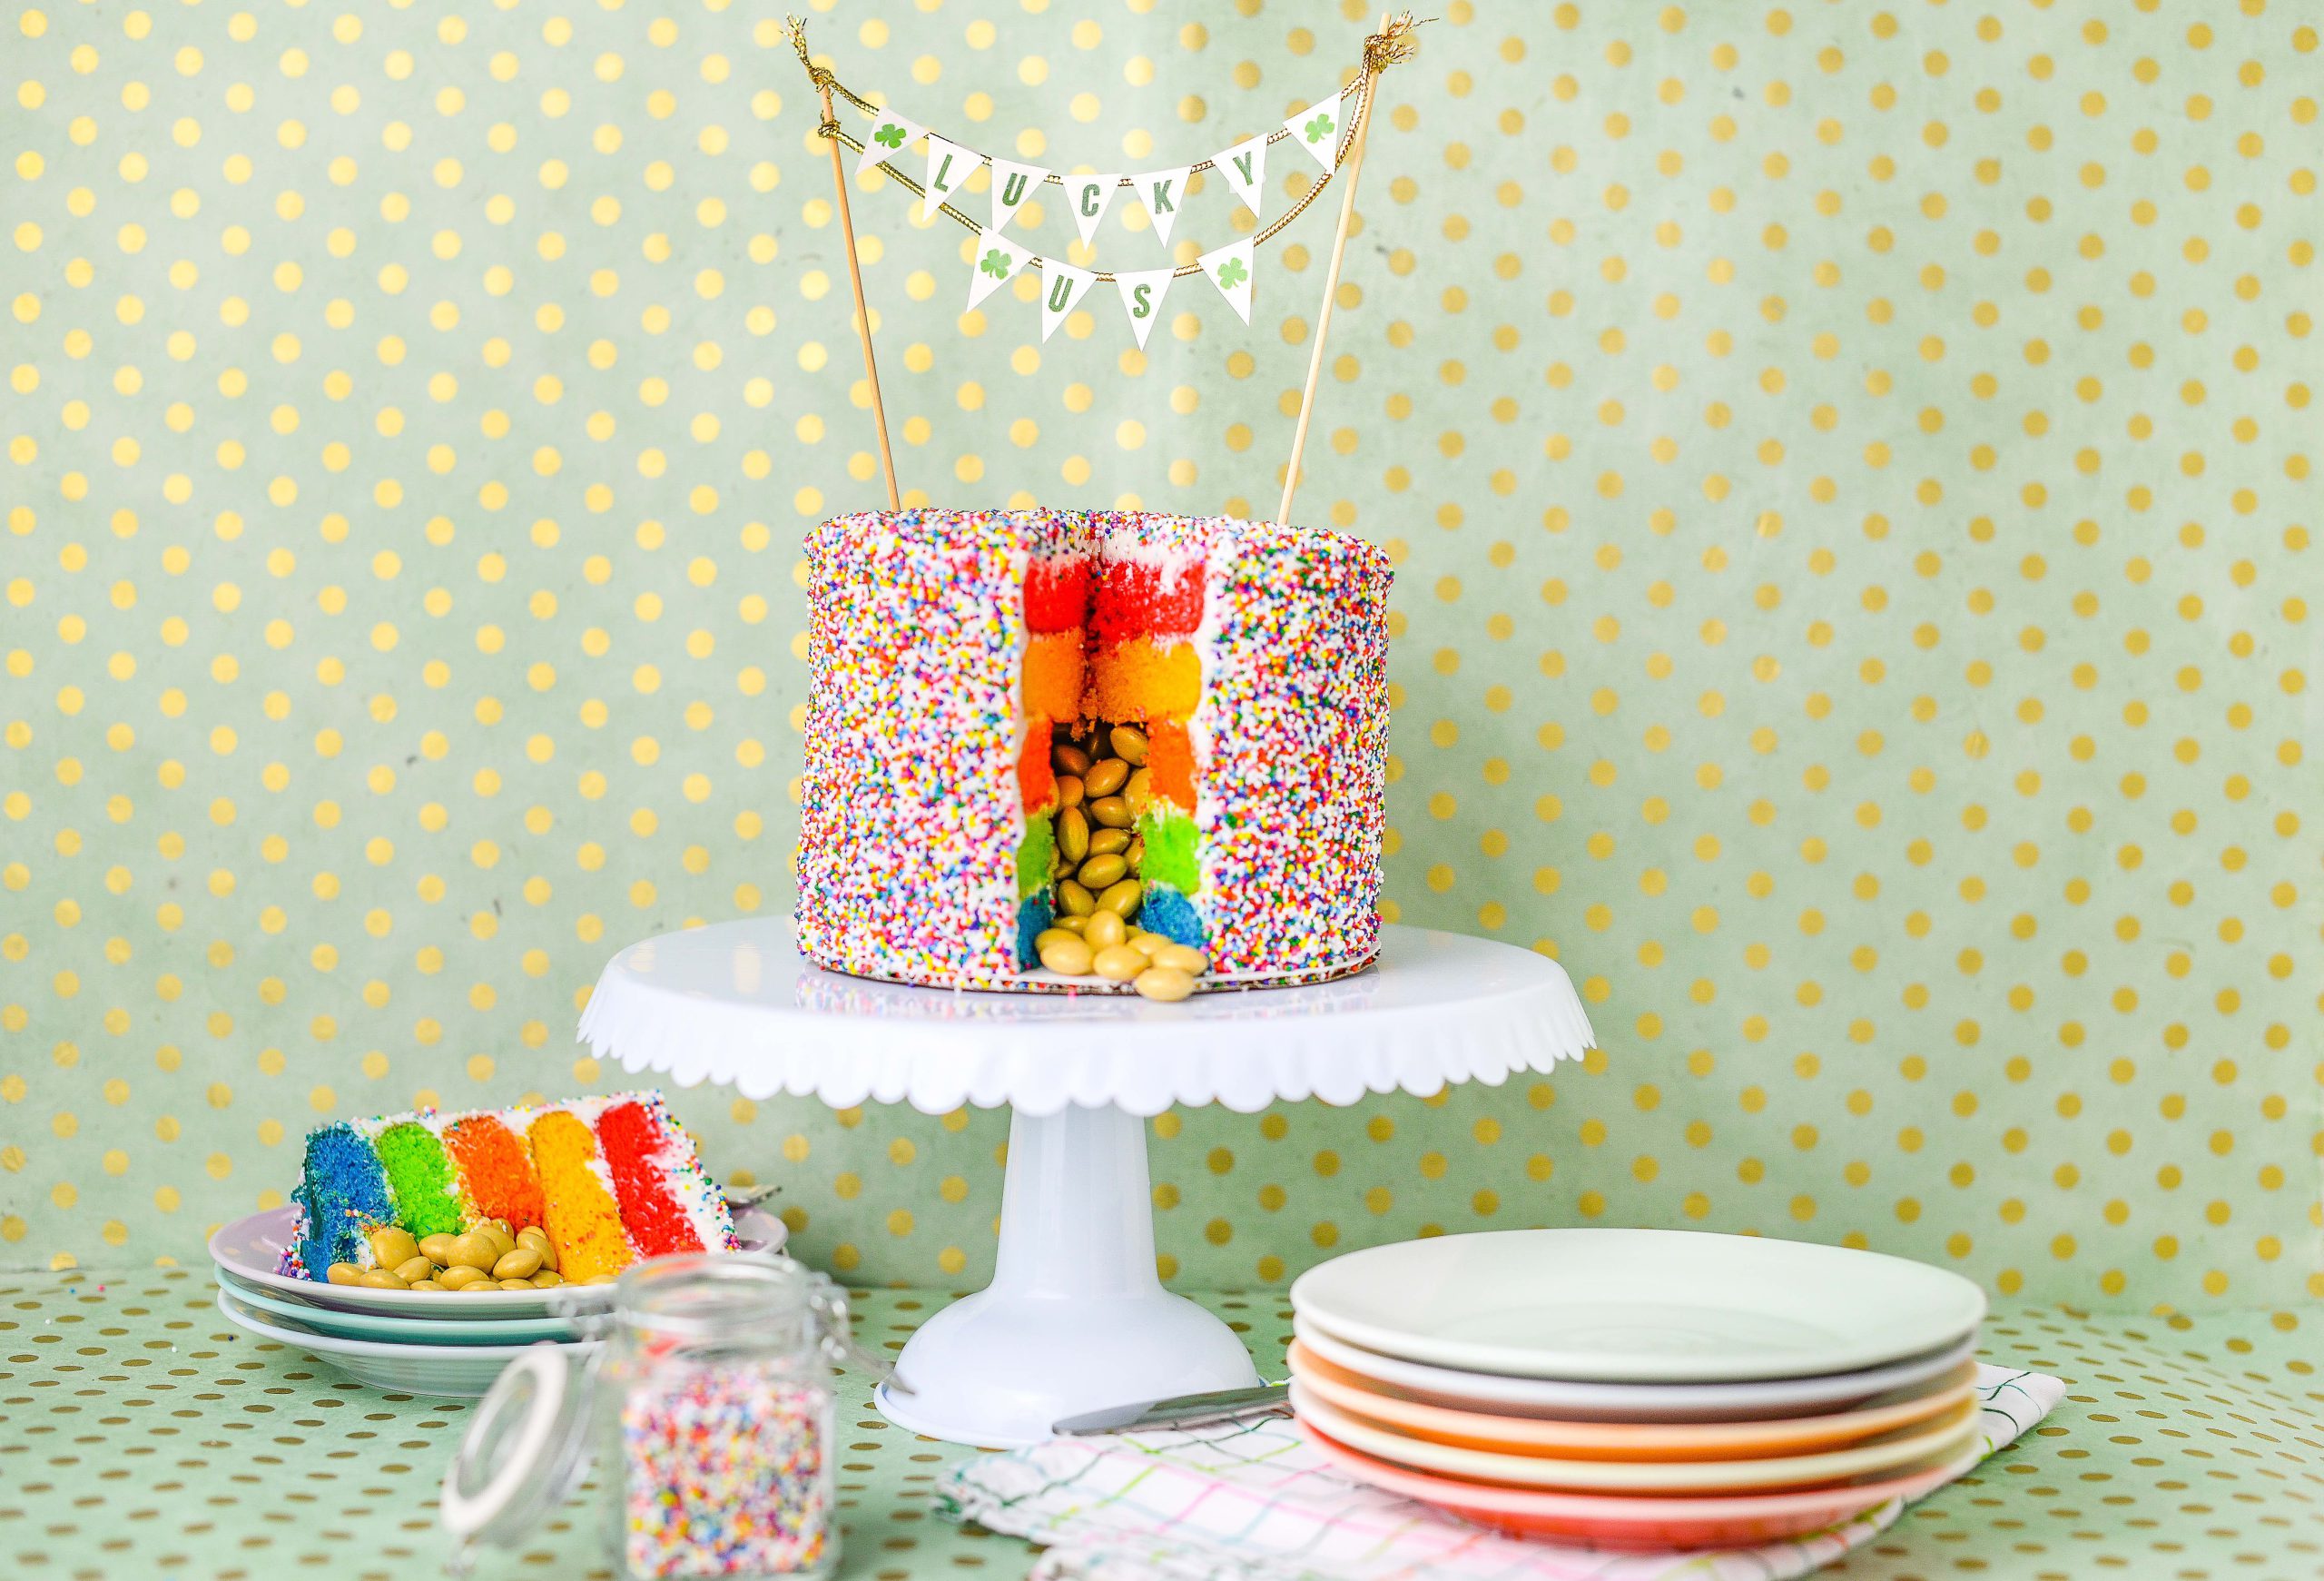 Sham-ROCK Your St. Patty’s Day with a Pot of Gold Rainbow Surprise Cake